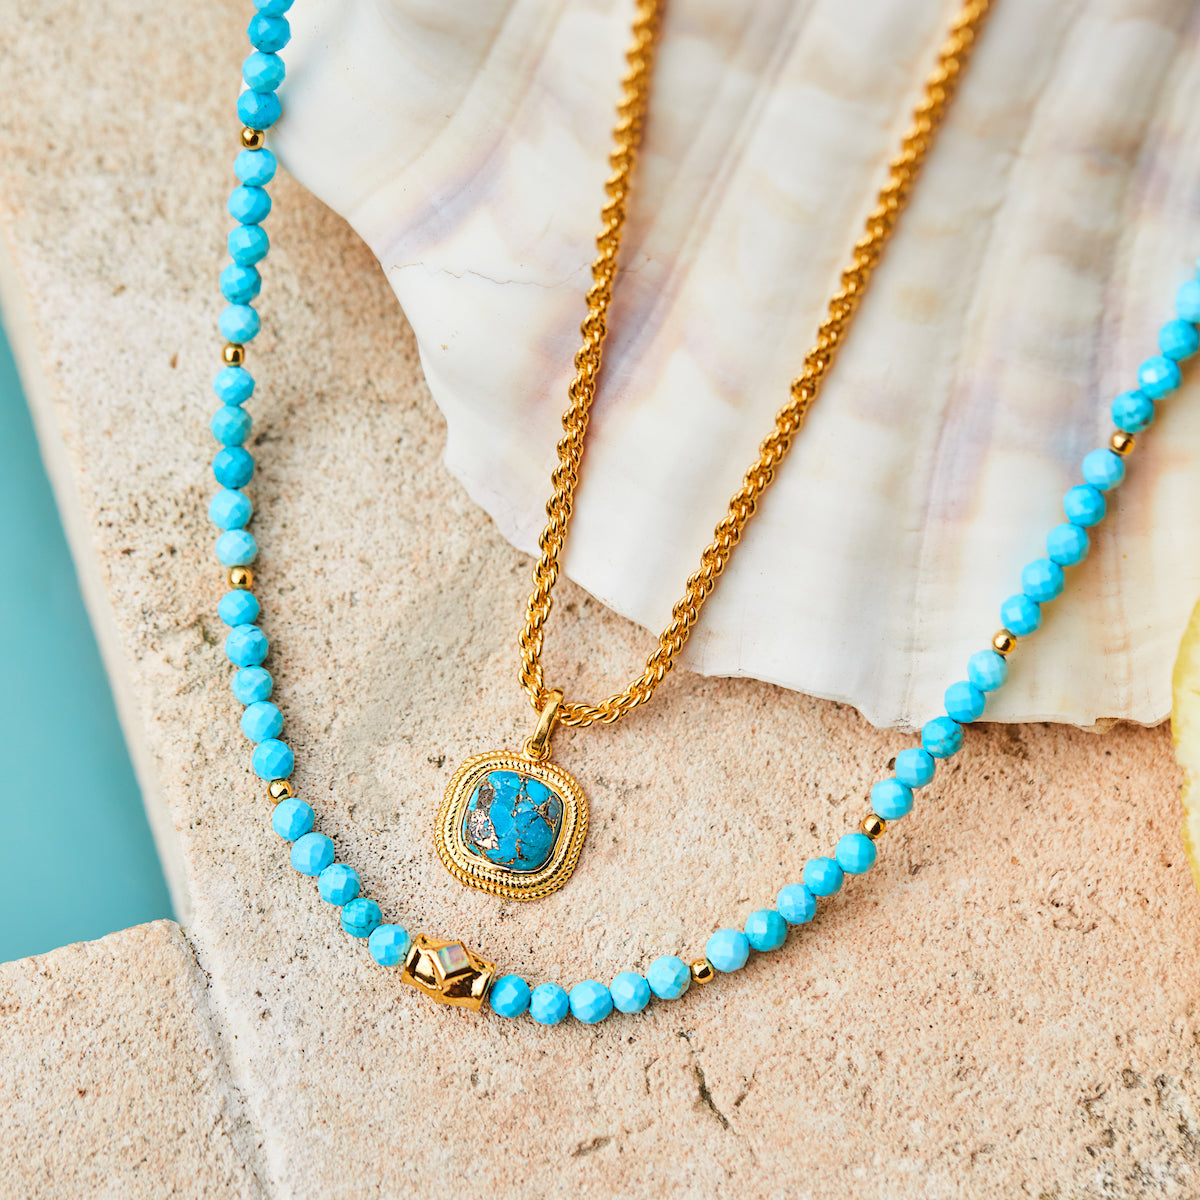 Handmade Turquoise and Silver Beaded Necklace. – Smithsonia